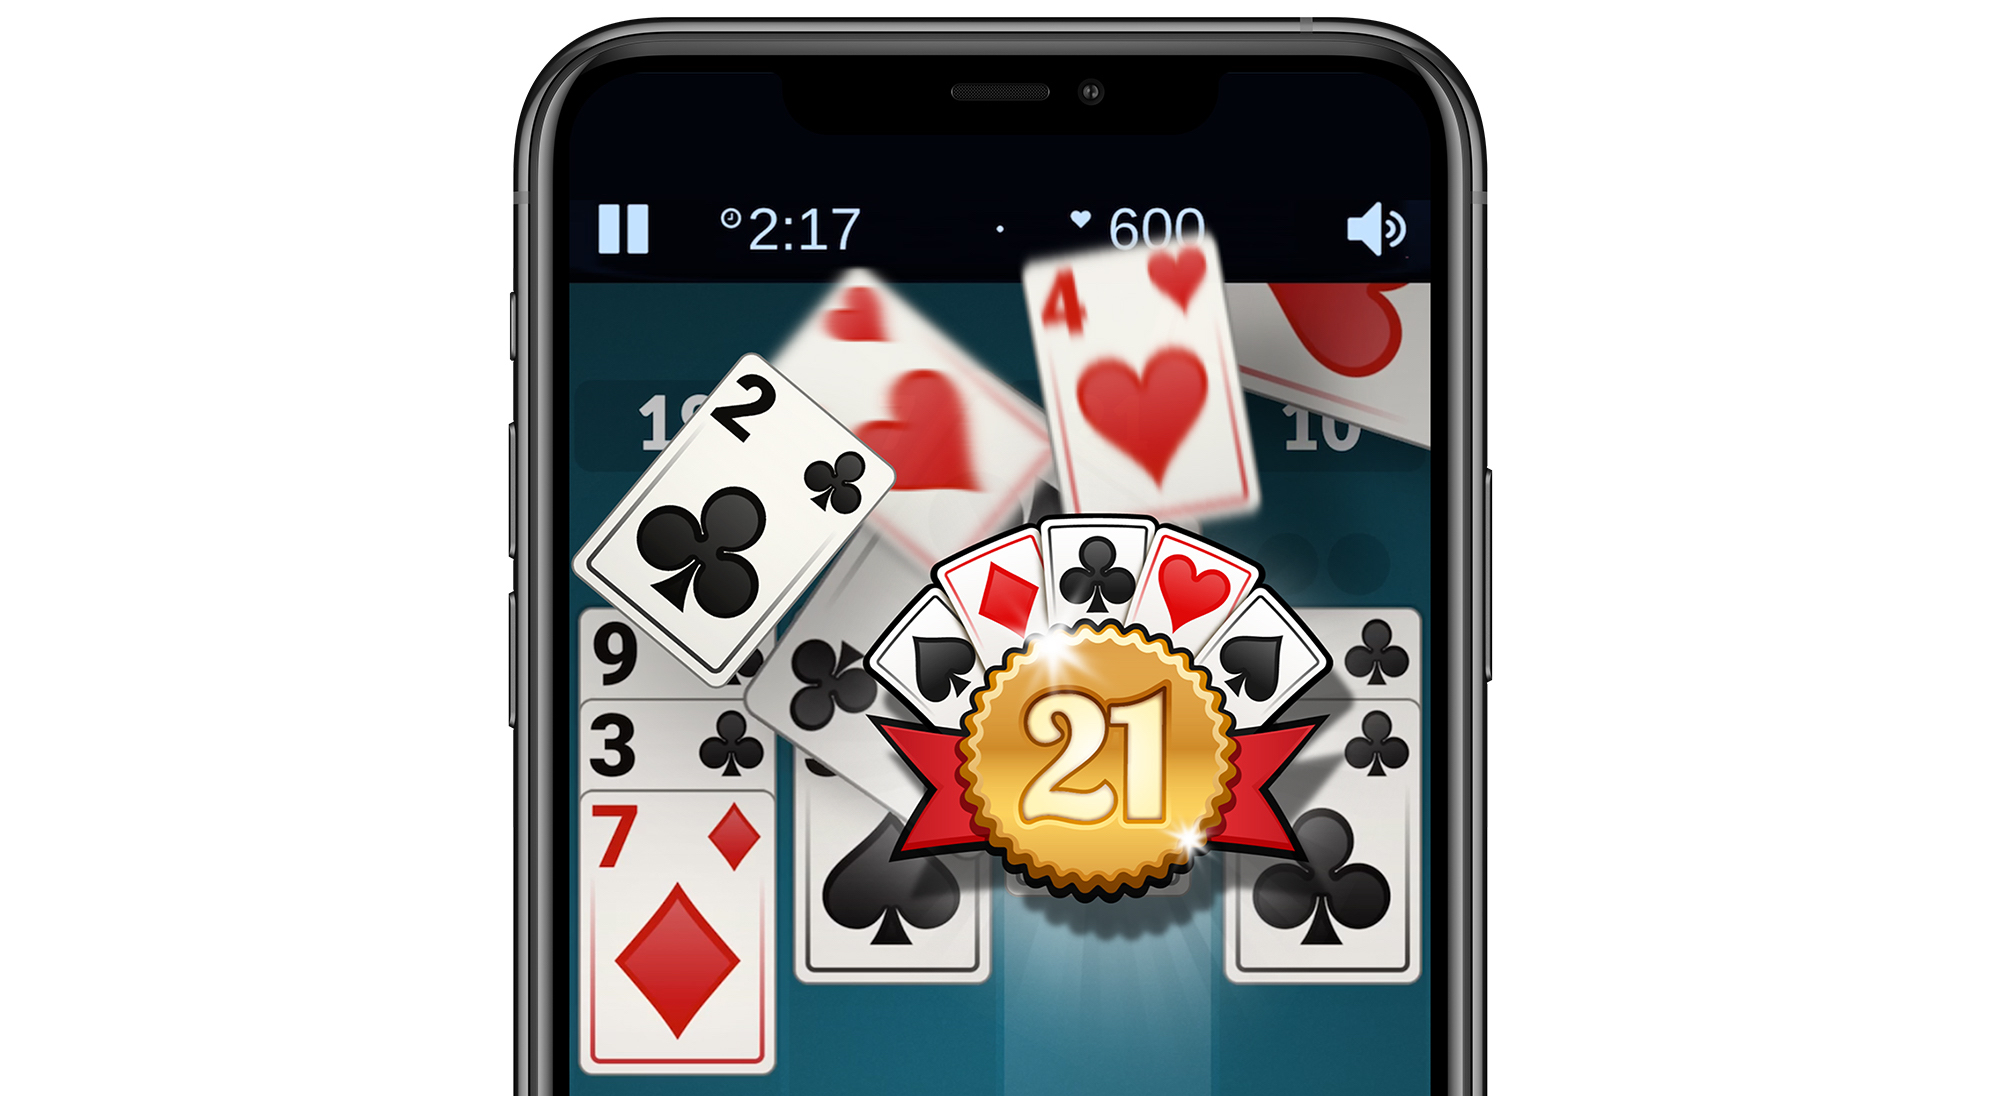 Play 21 is a Blackjack + Solitaire Mashup That Lets You Win Cash Prizes